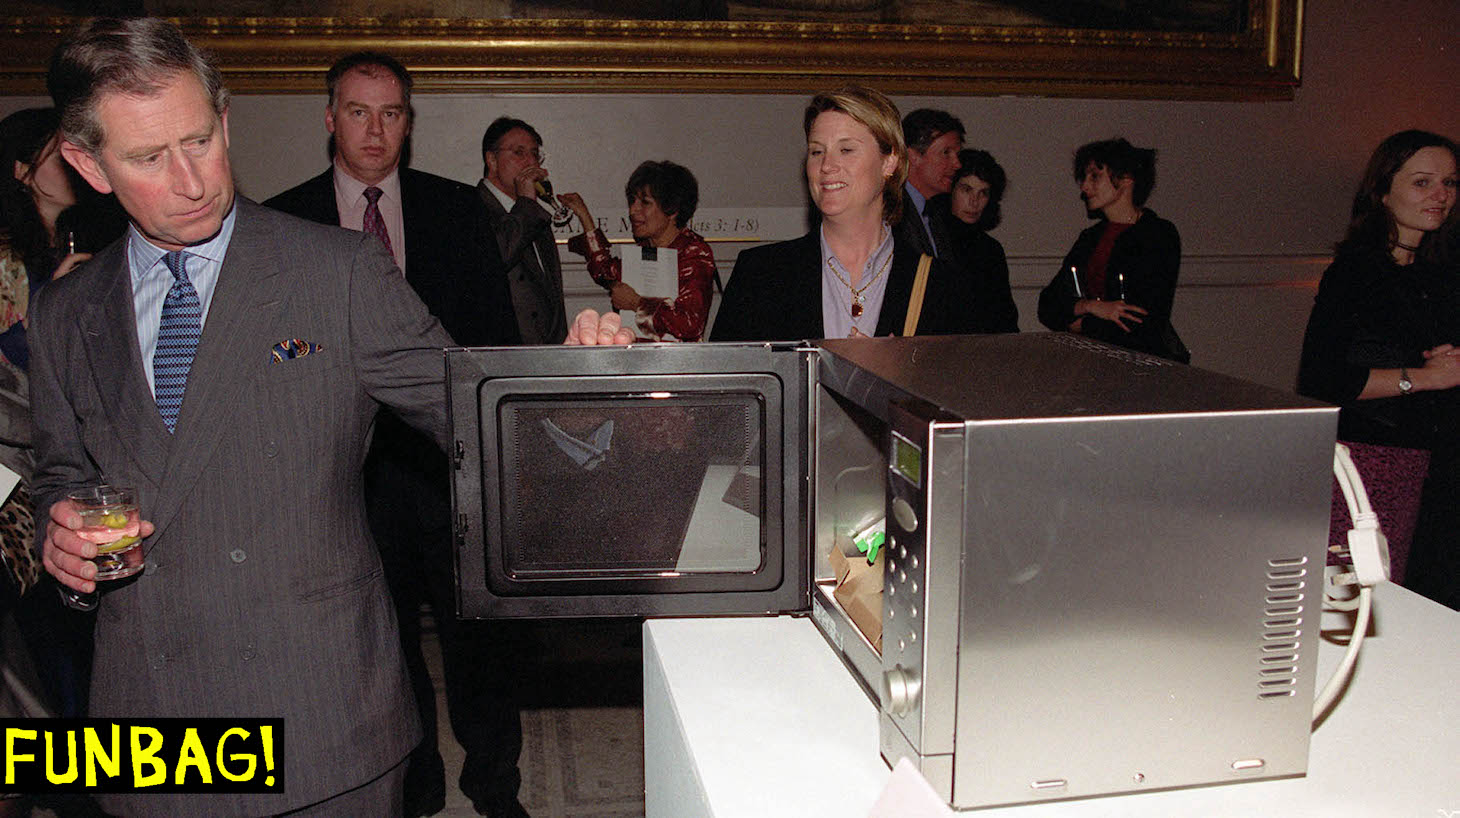 The Prince of Wales looks closely at the Sanyo UK Microwave Oven from the Steel Life' range, during an award ceremony held at The Victoria and Albert Museum in central. * The Homes and Gardens Classical Design Awards, recognise and reward outstanding contempary British Design in everyday items, the magazine Readers Award went to the Sanyo oven which was chosen for unusually simple, pleasant and modern styling. (Photo by Peter Jordan - PA Images/PA Images via Getty Images)